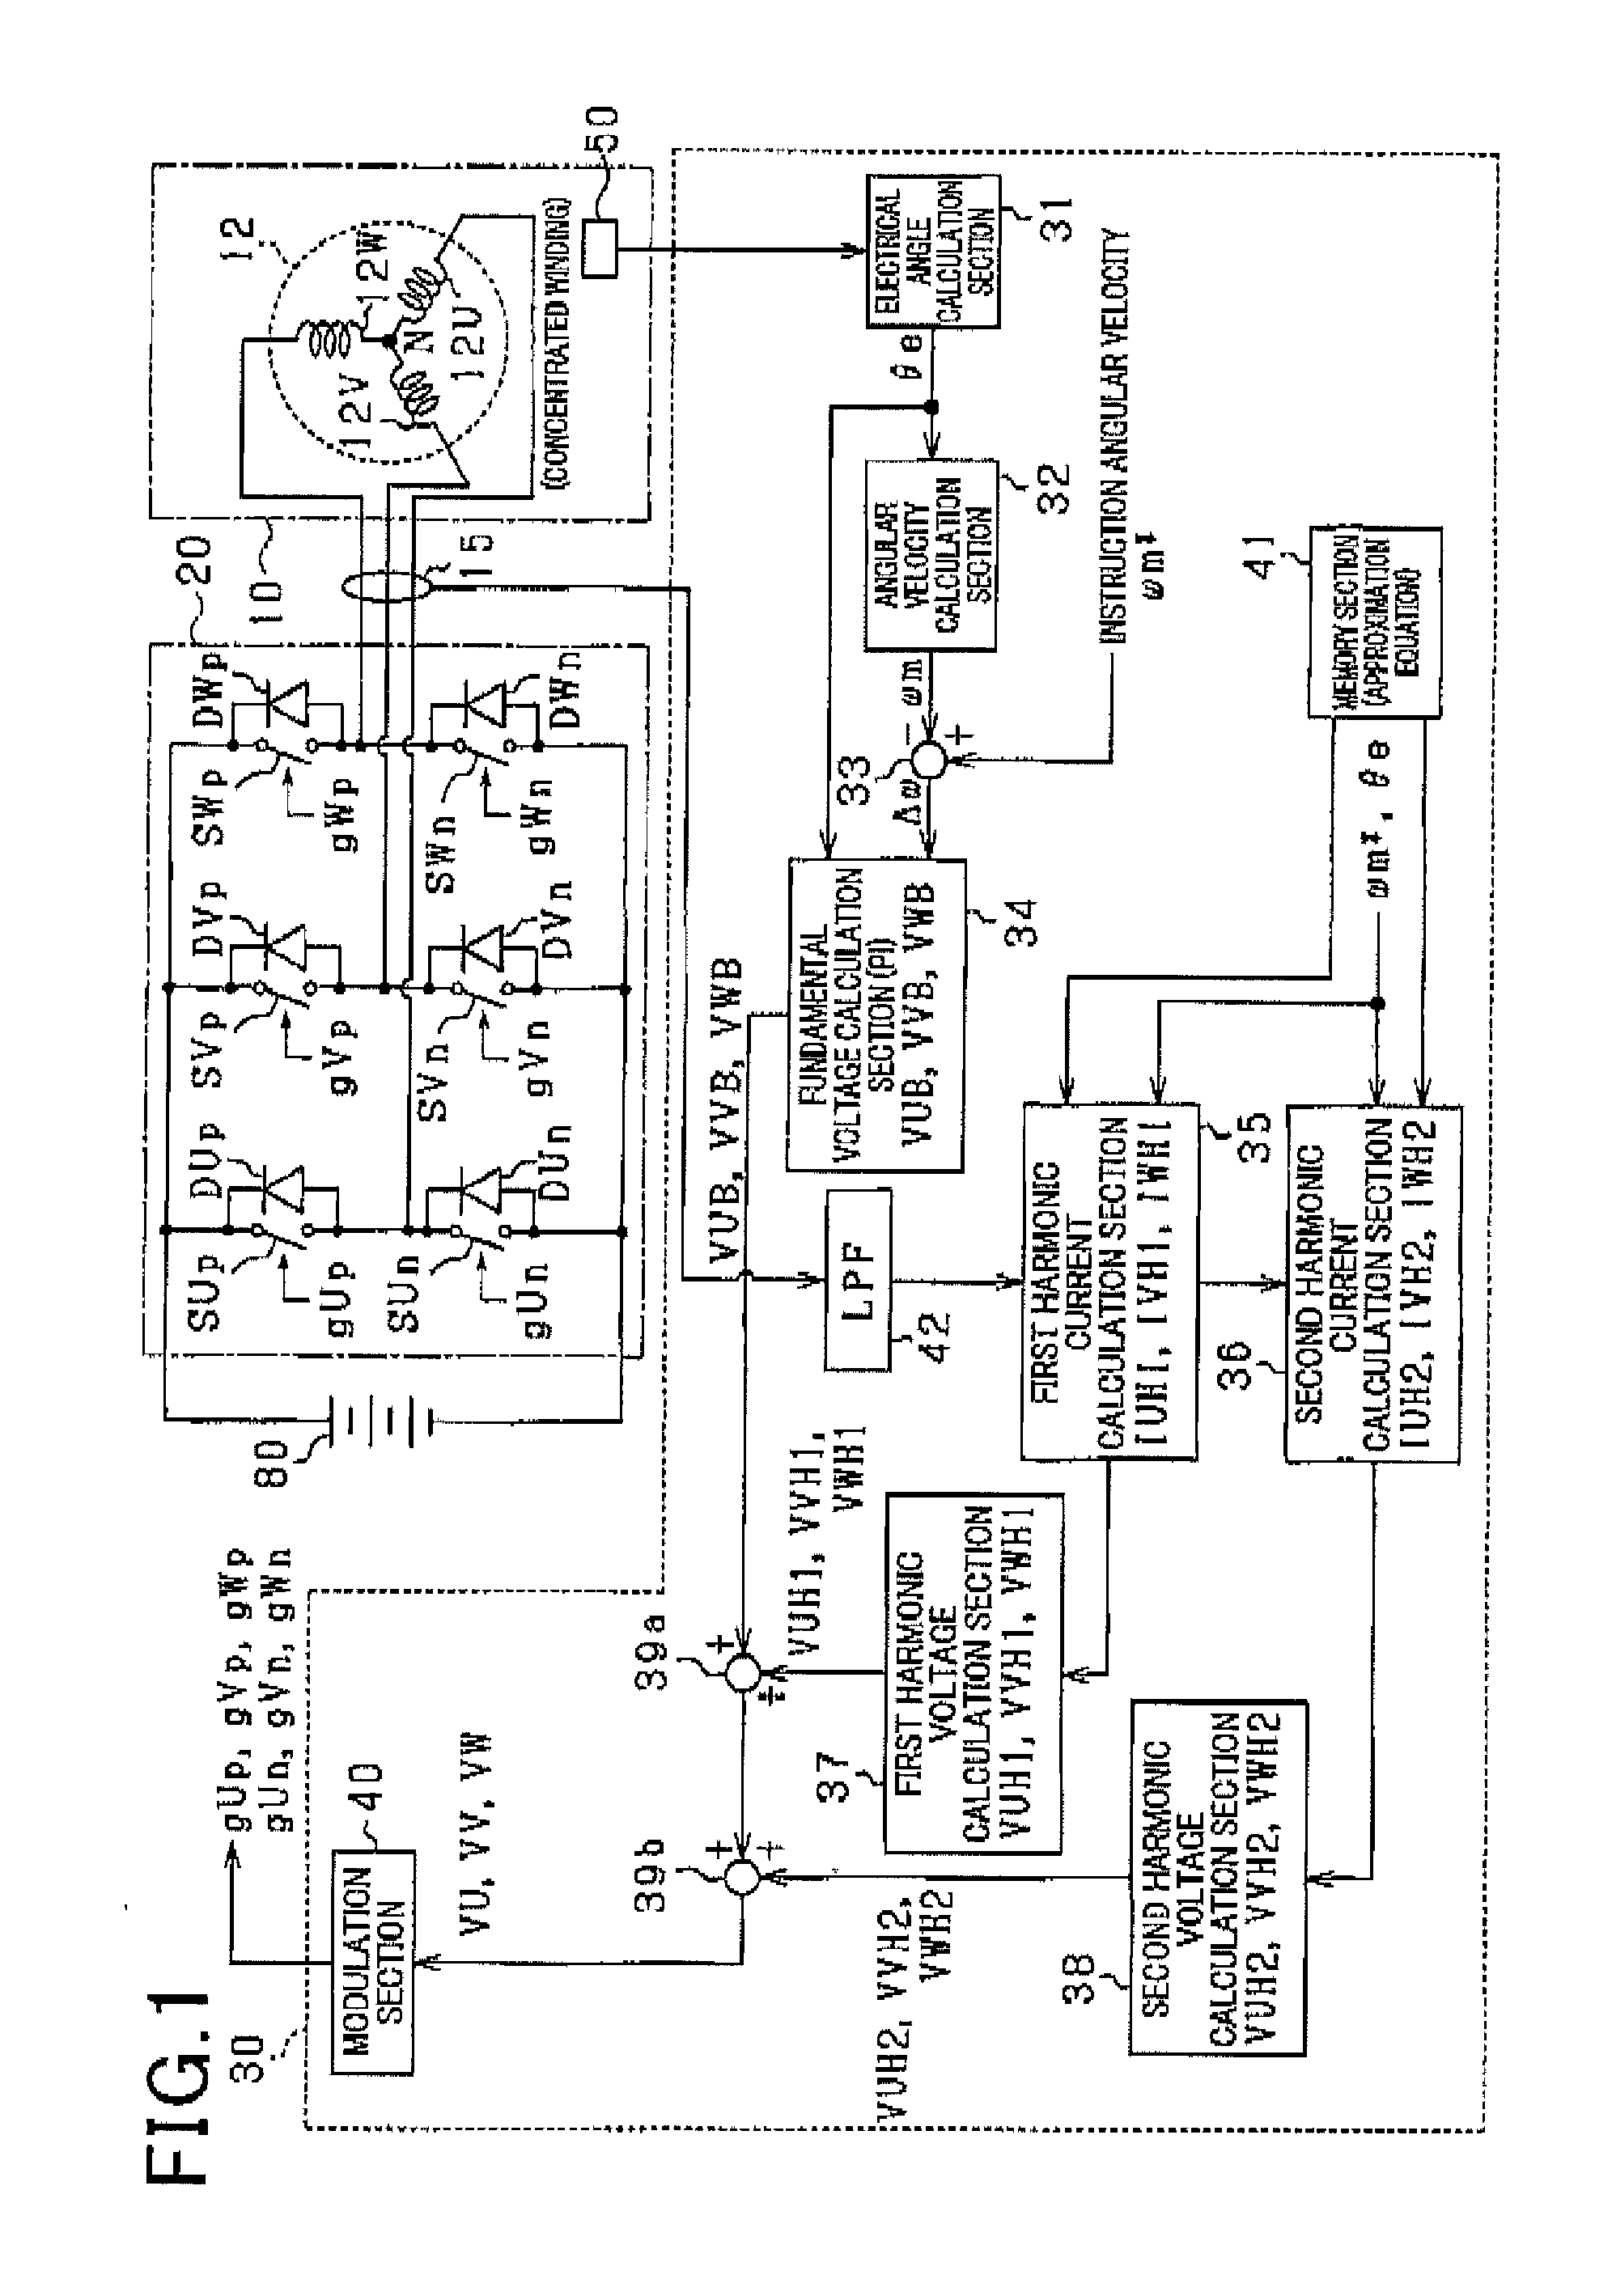 Control device for rotating electric machine